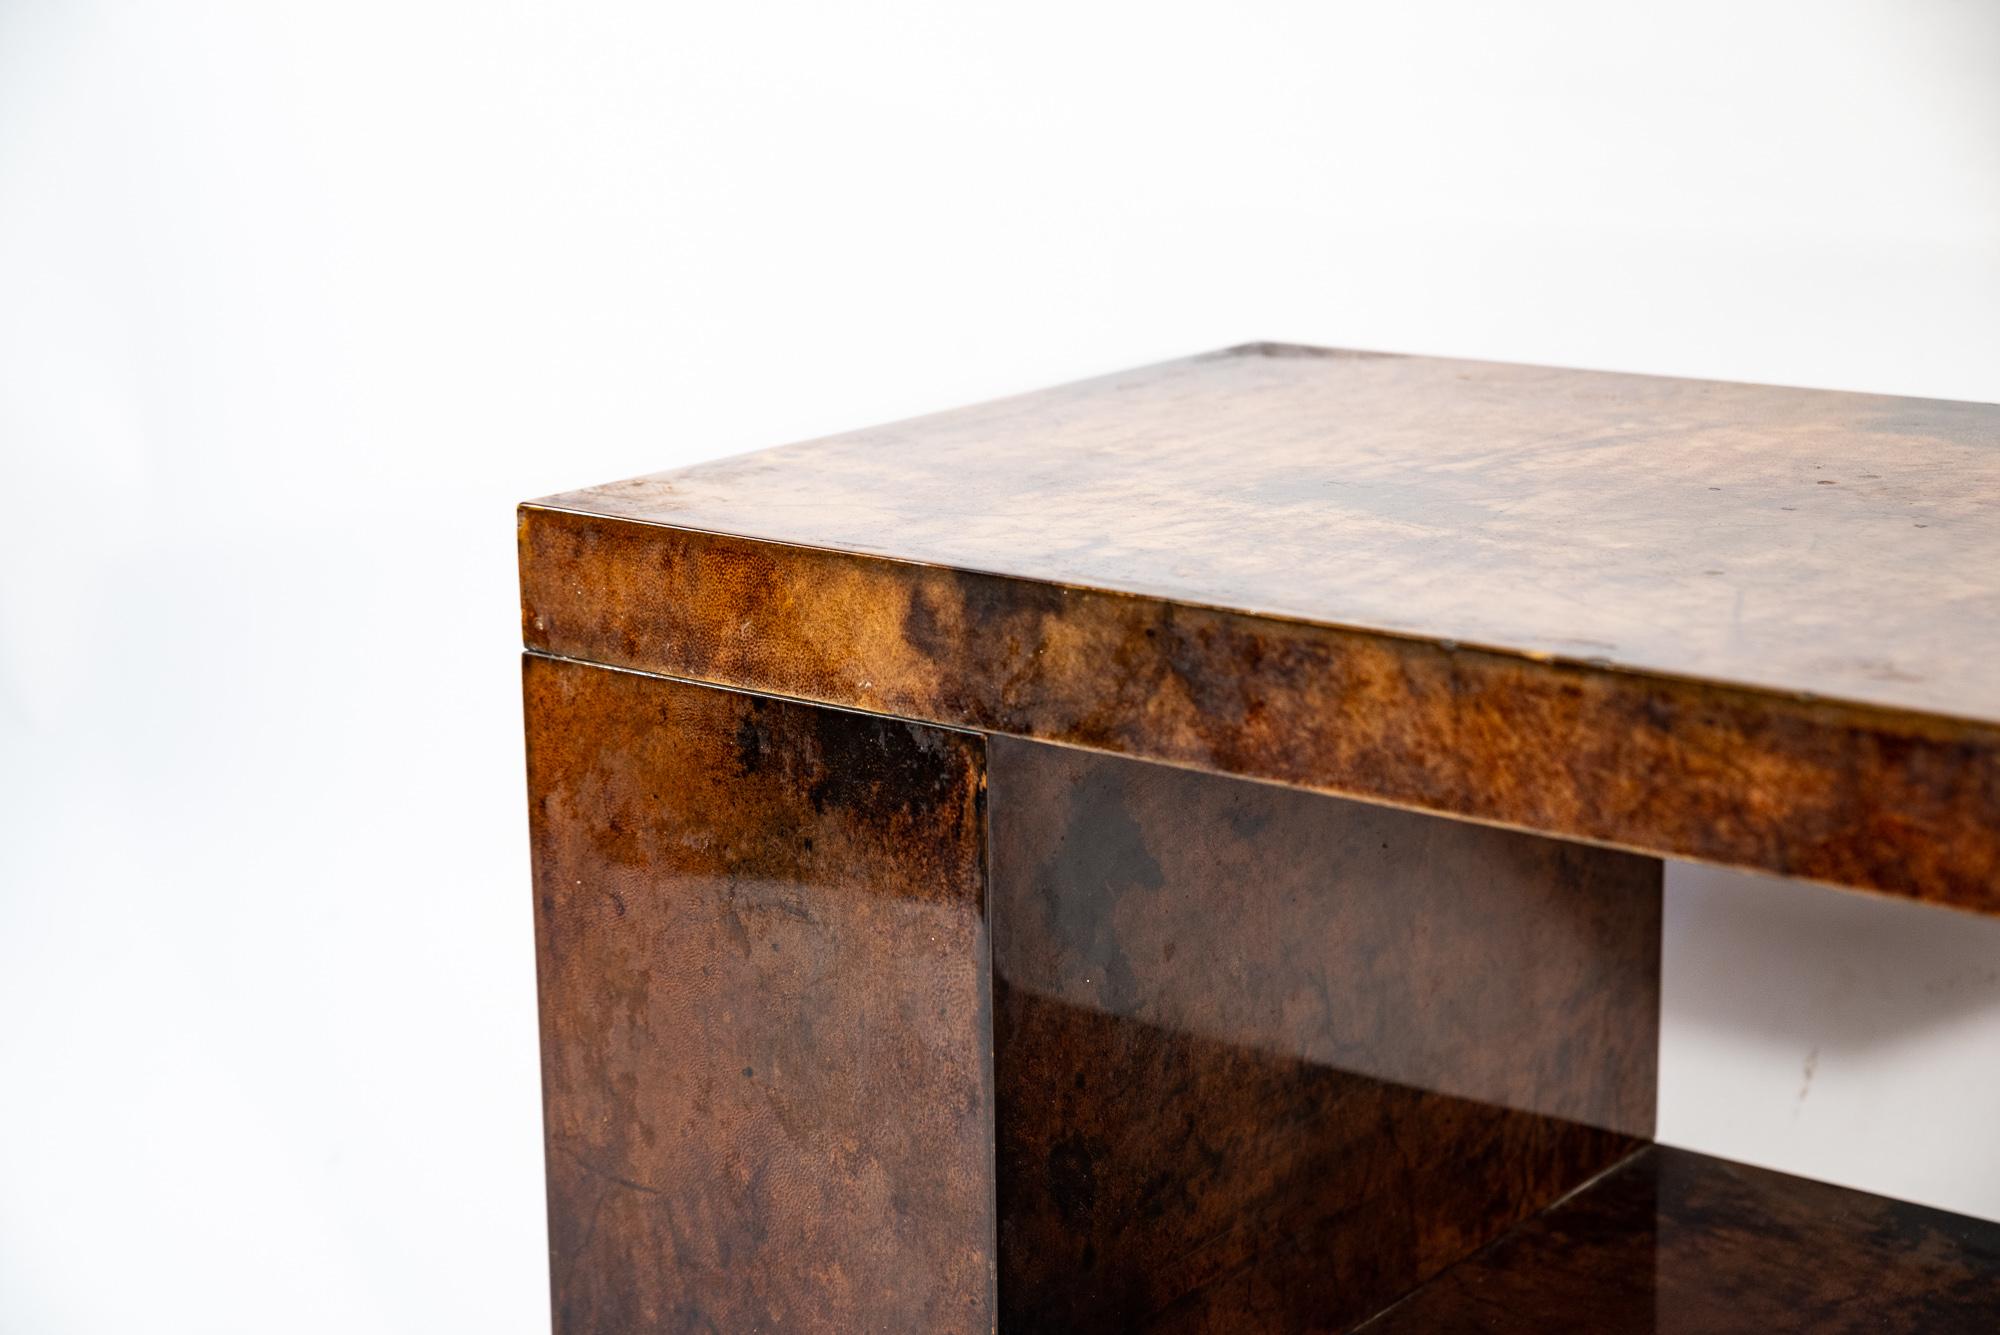 Wood Aldo Tura, Coffee Table, Tinted Parchment, circa 1980, Italy